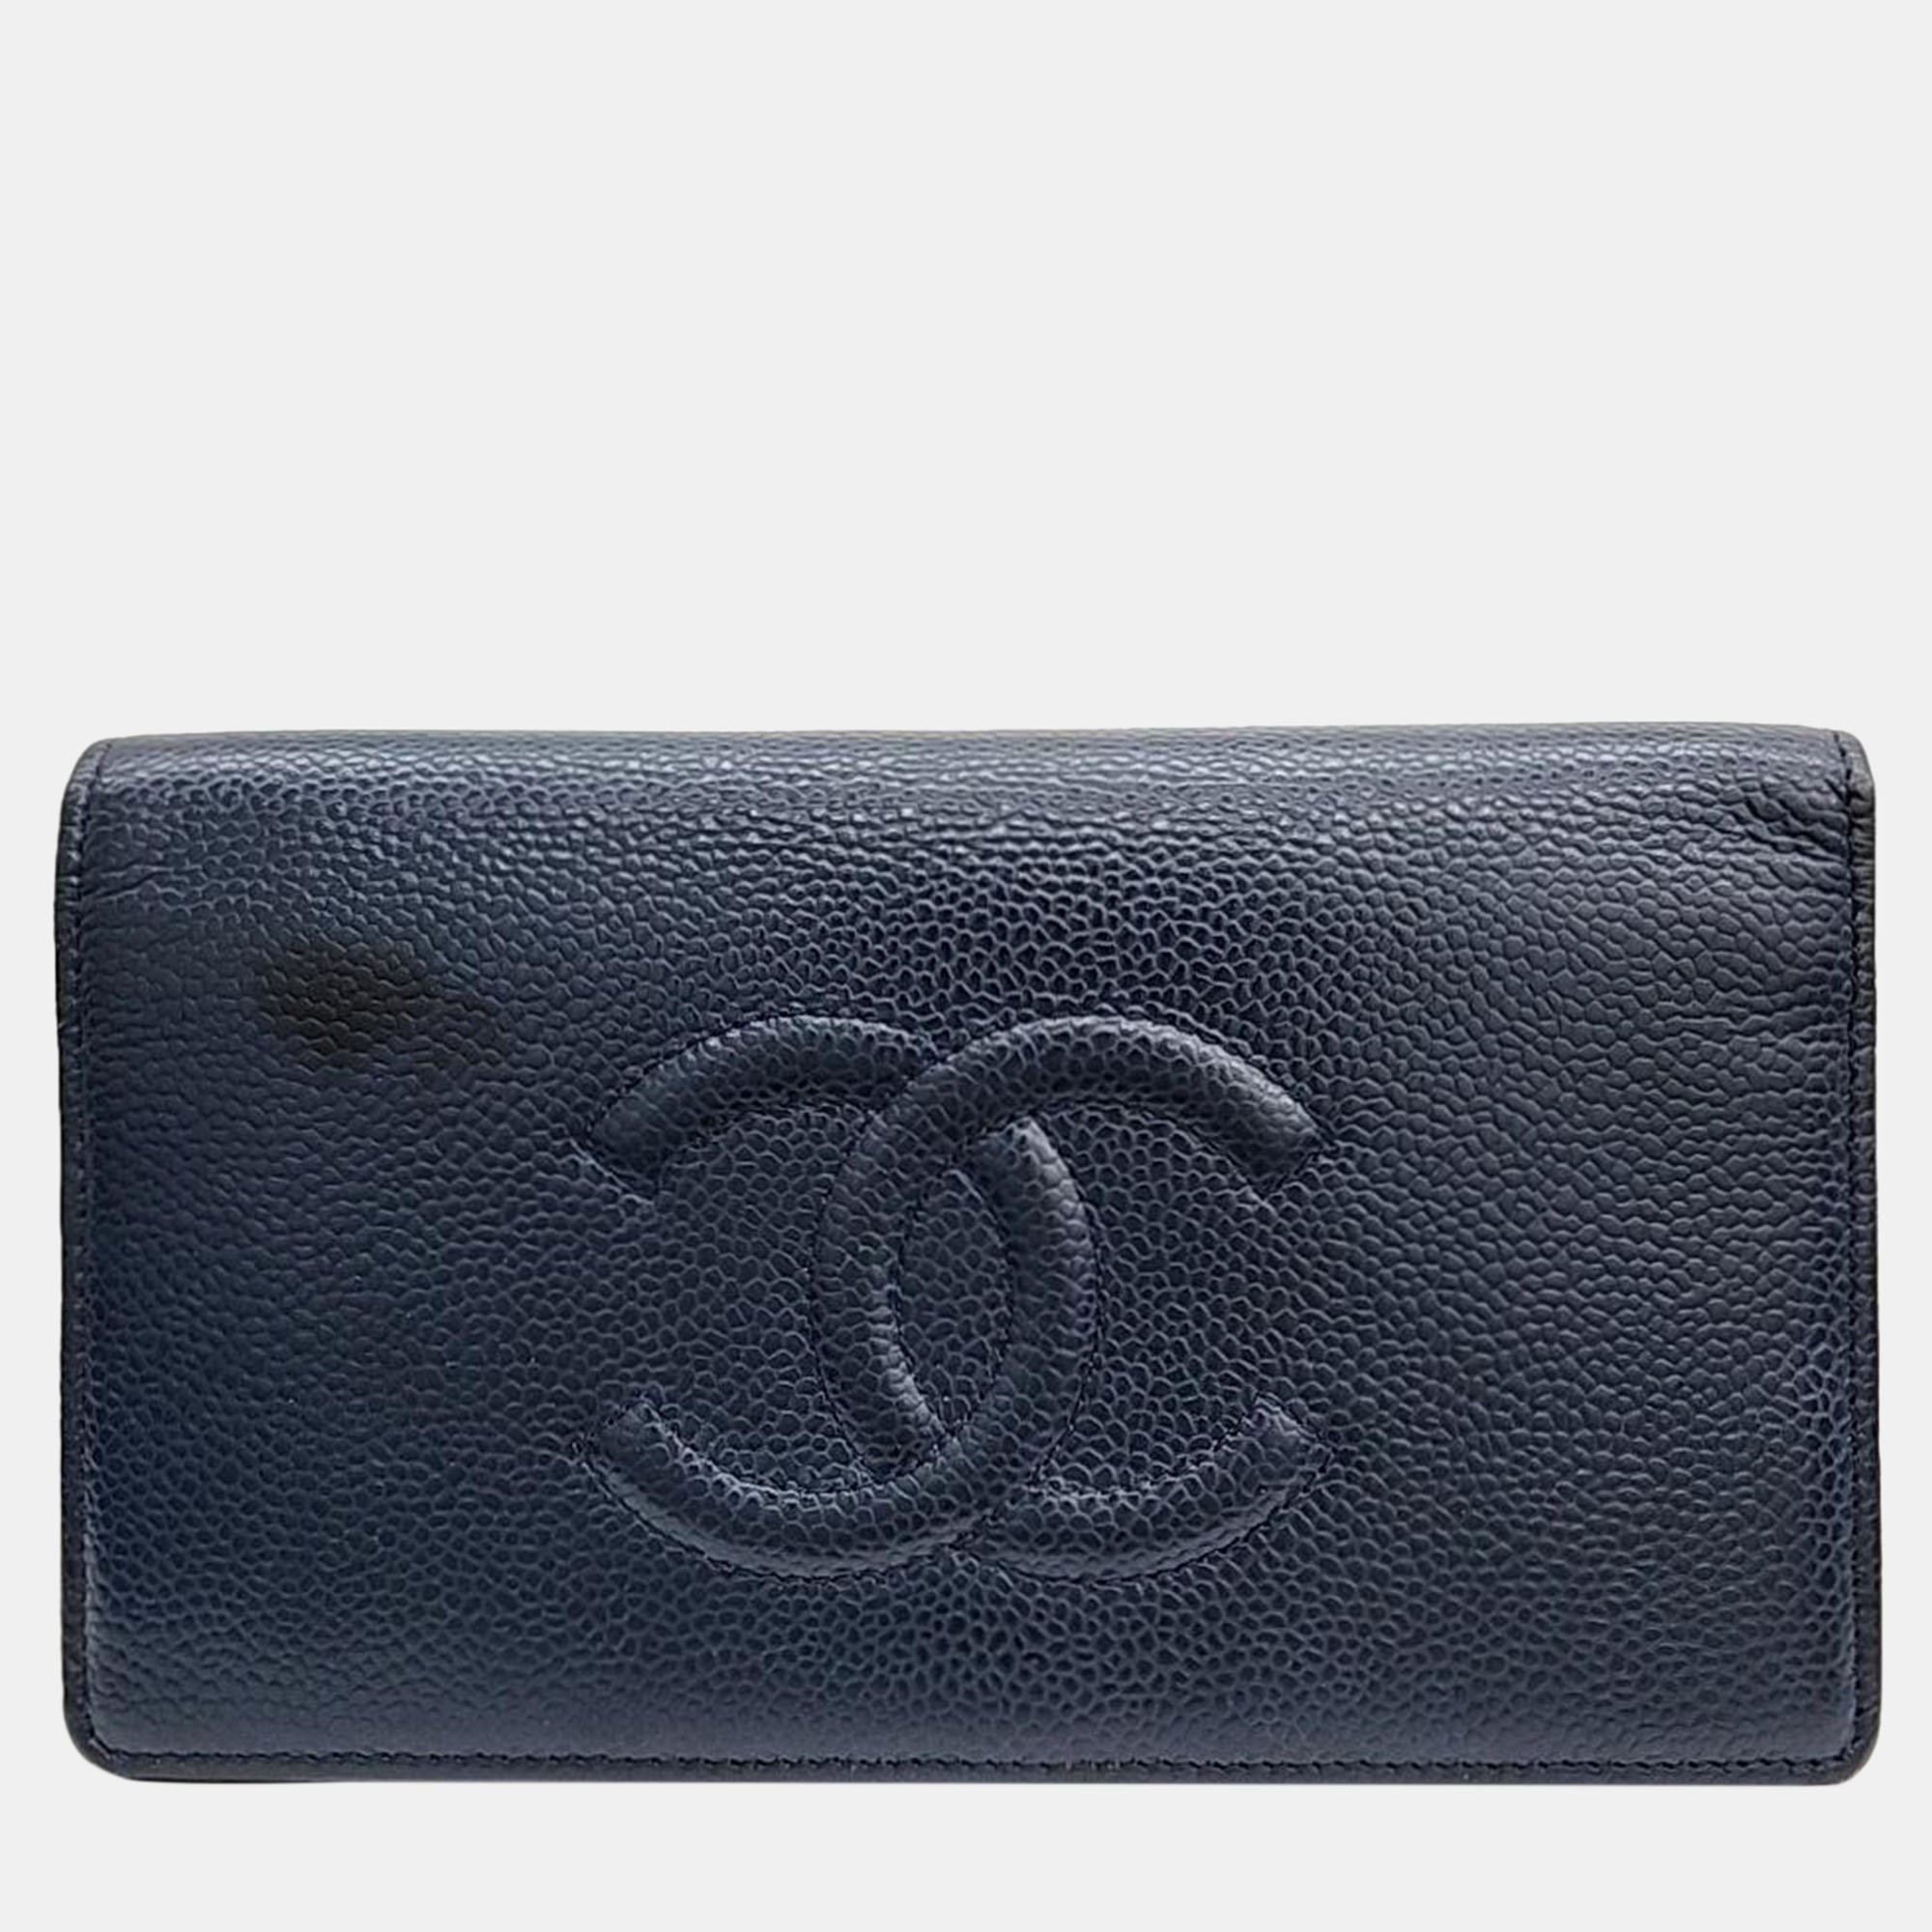 Pre-owned Chanel Black Caviar Long Wallet